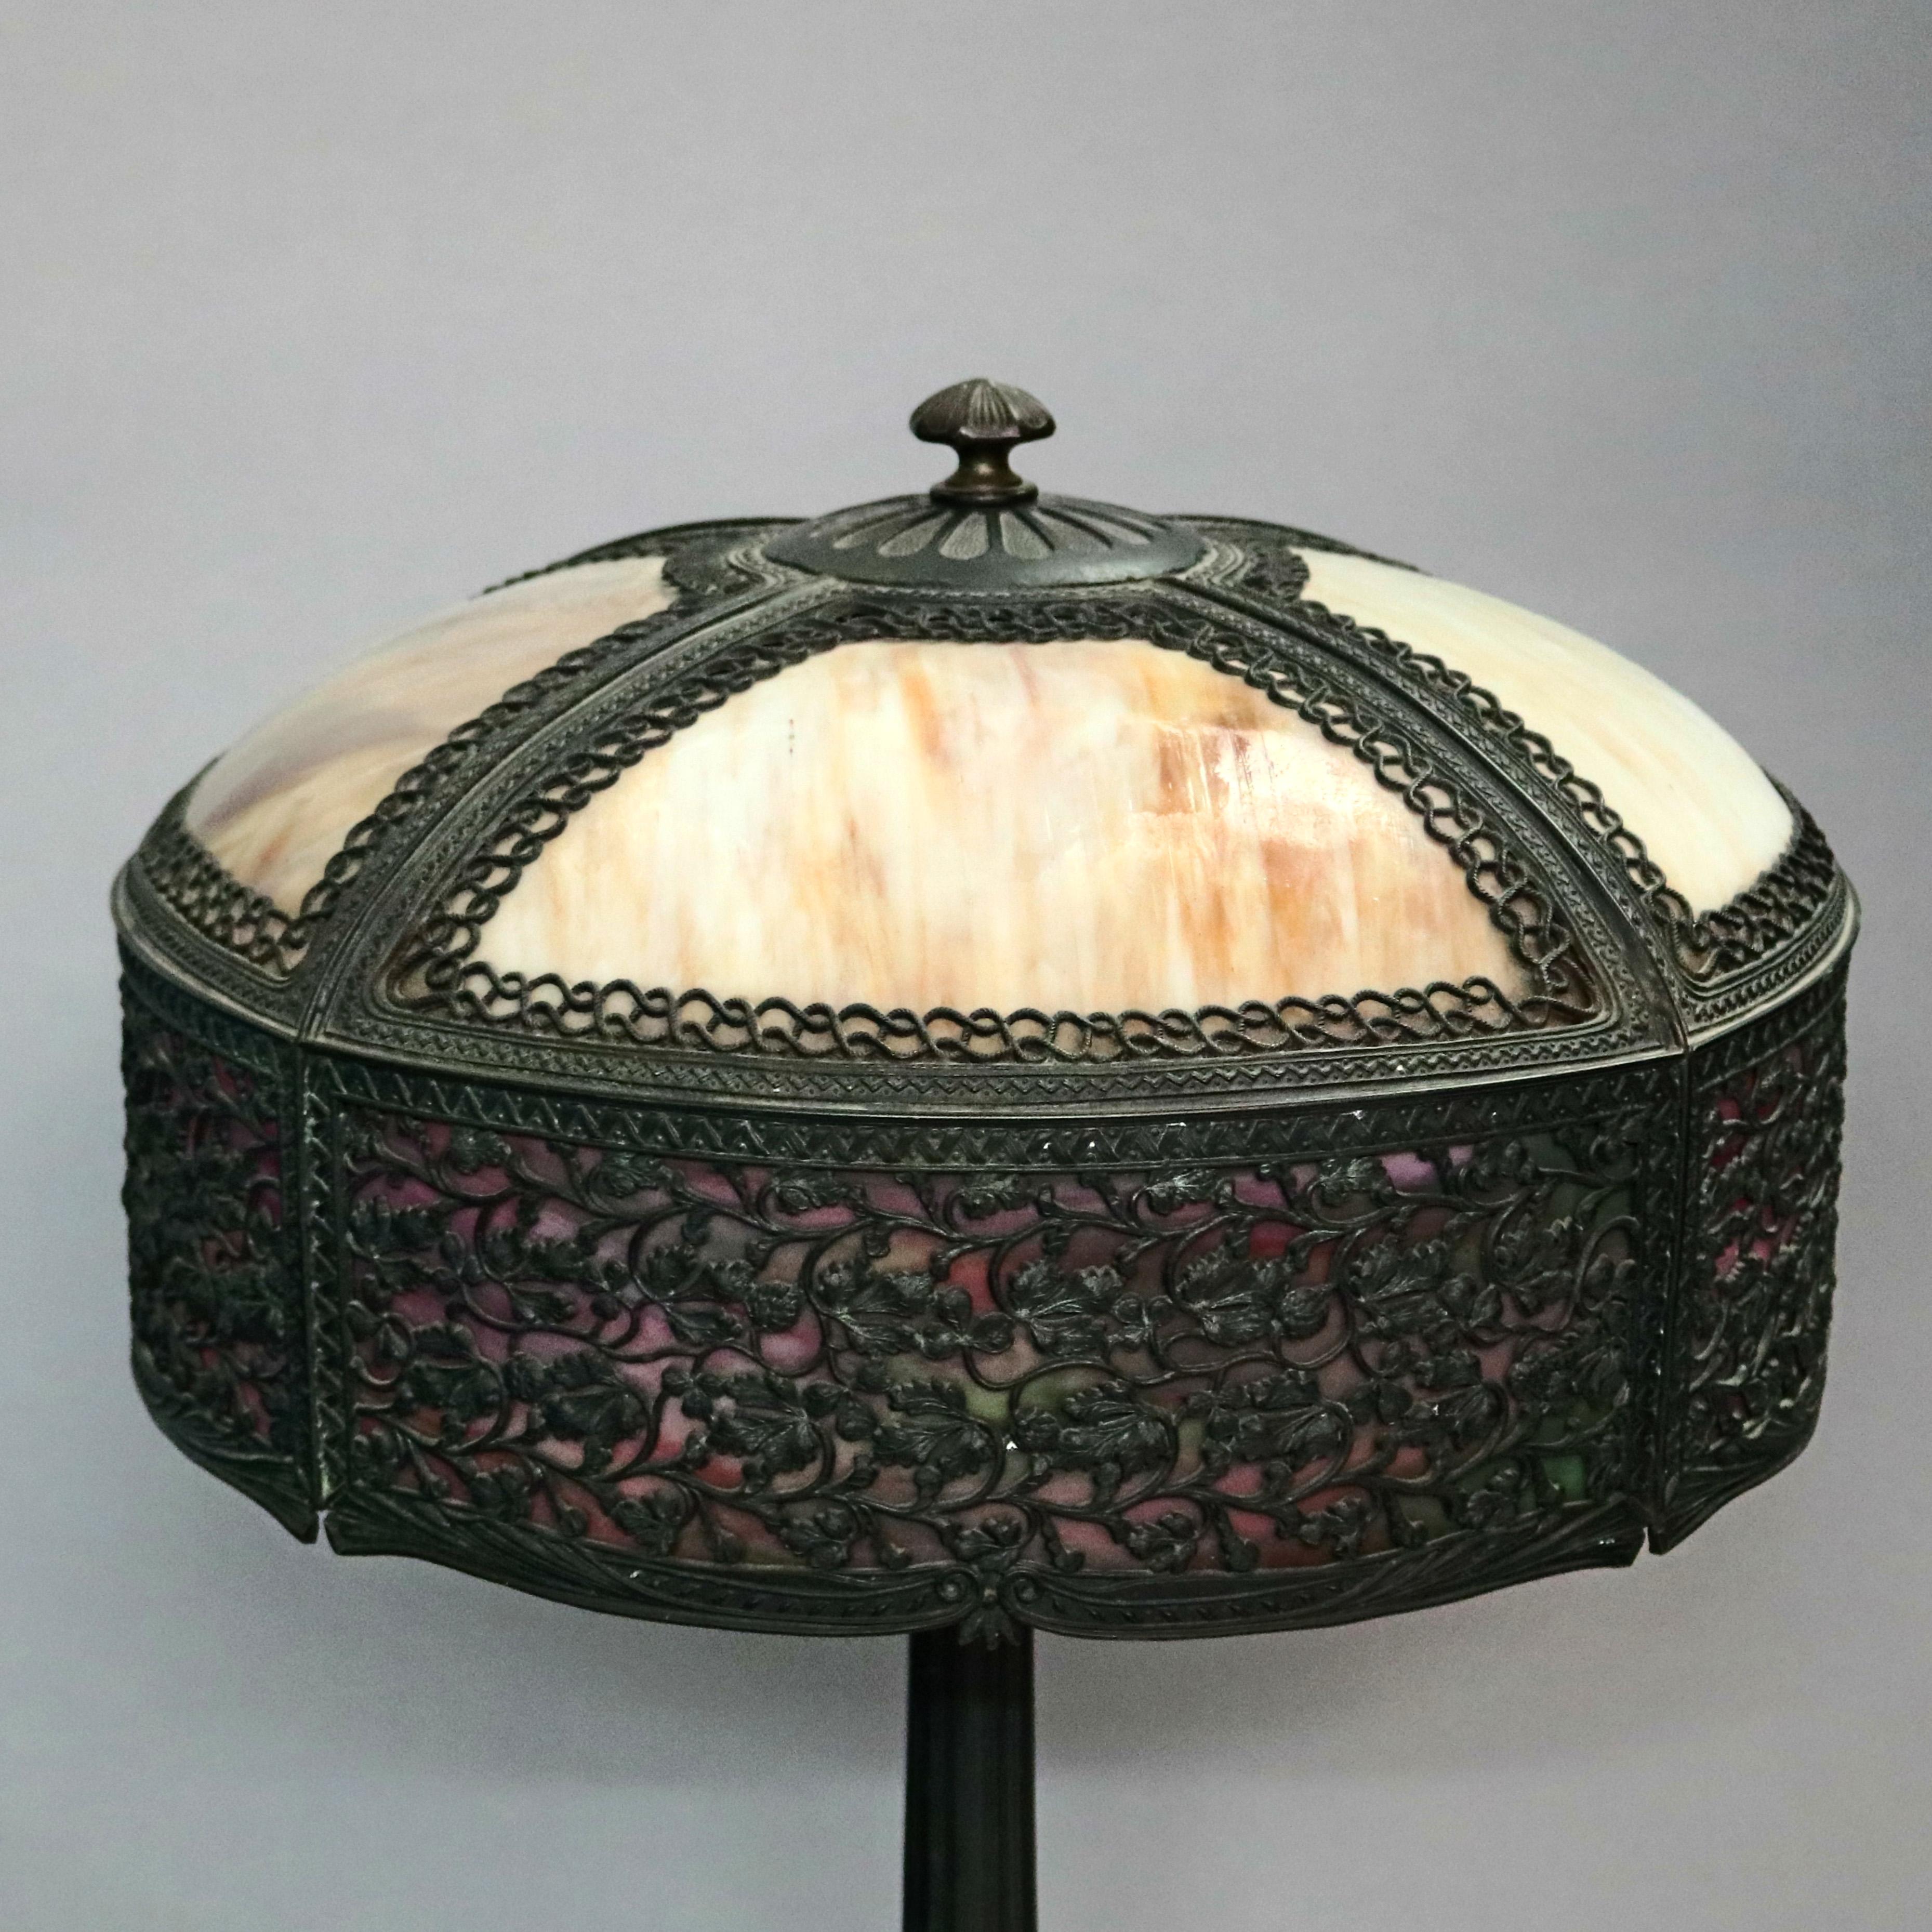 An antique Arts & Crafts table lamp in the Bradley & Hubbard style offers shade with cast frame having pierced foliate rim housing two-toned slag glass and surmounting cast foliate form base having two independently controlled sockets, circa